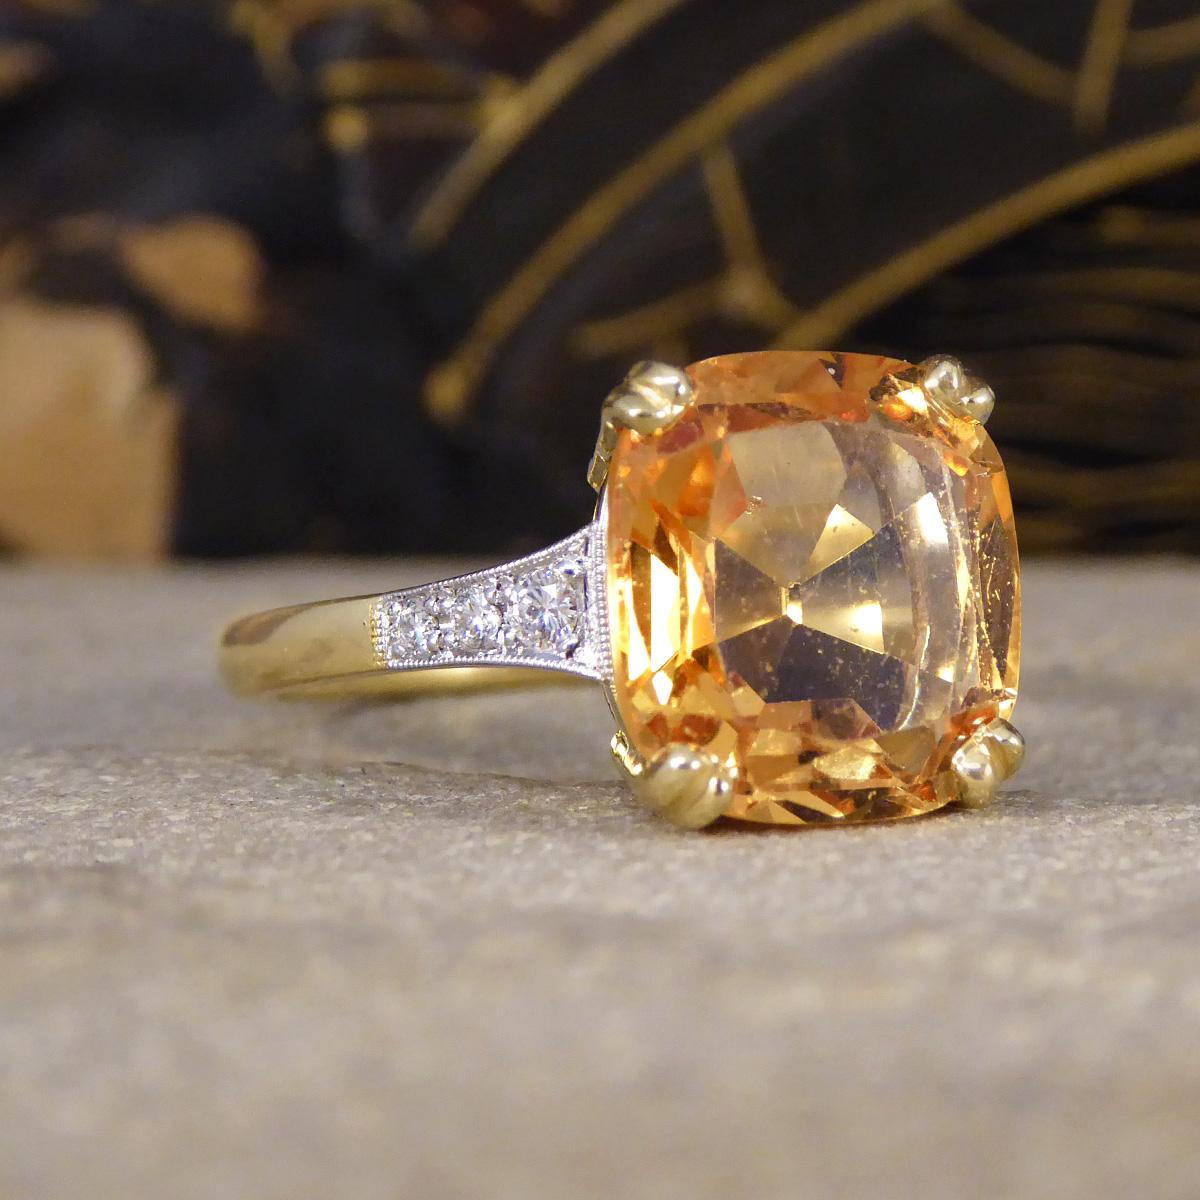 Behold the exquisite beauty of our 5.12ct Imperial Topaz Ring, a true masterpiece that seamlessly combines the allure of an antique design with the elegance of contemporary craftsmanship. The stunning 5.12ct Imperial Topaz, held securely in a